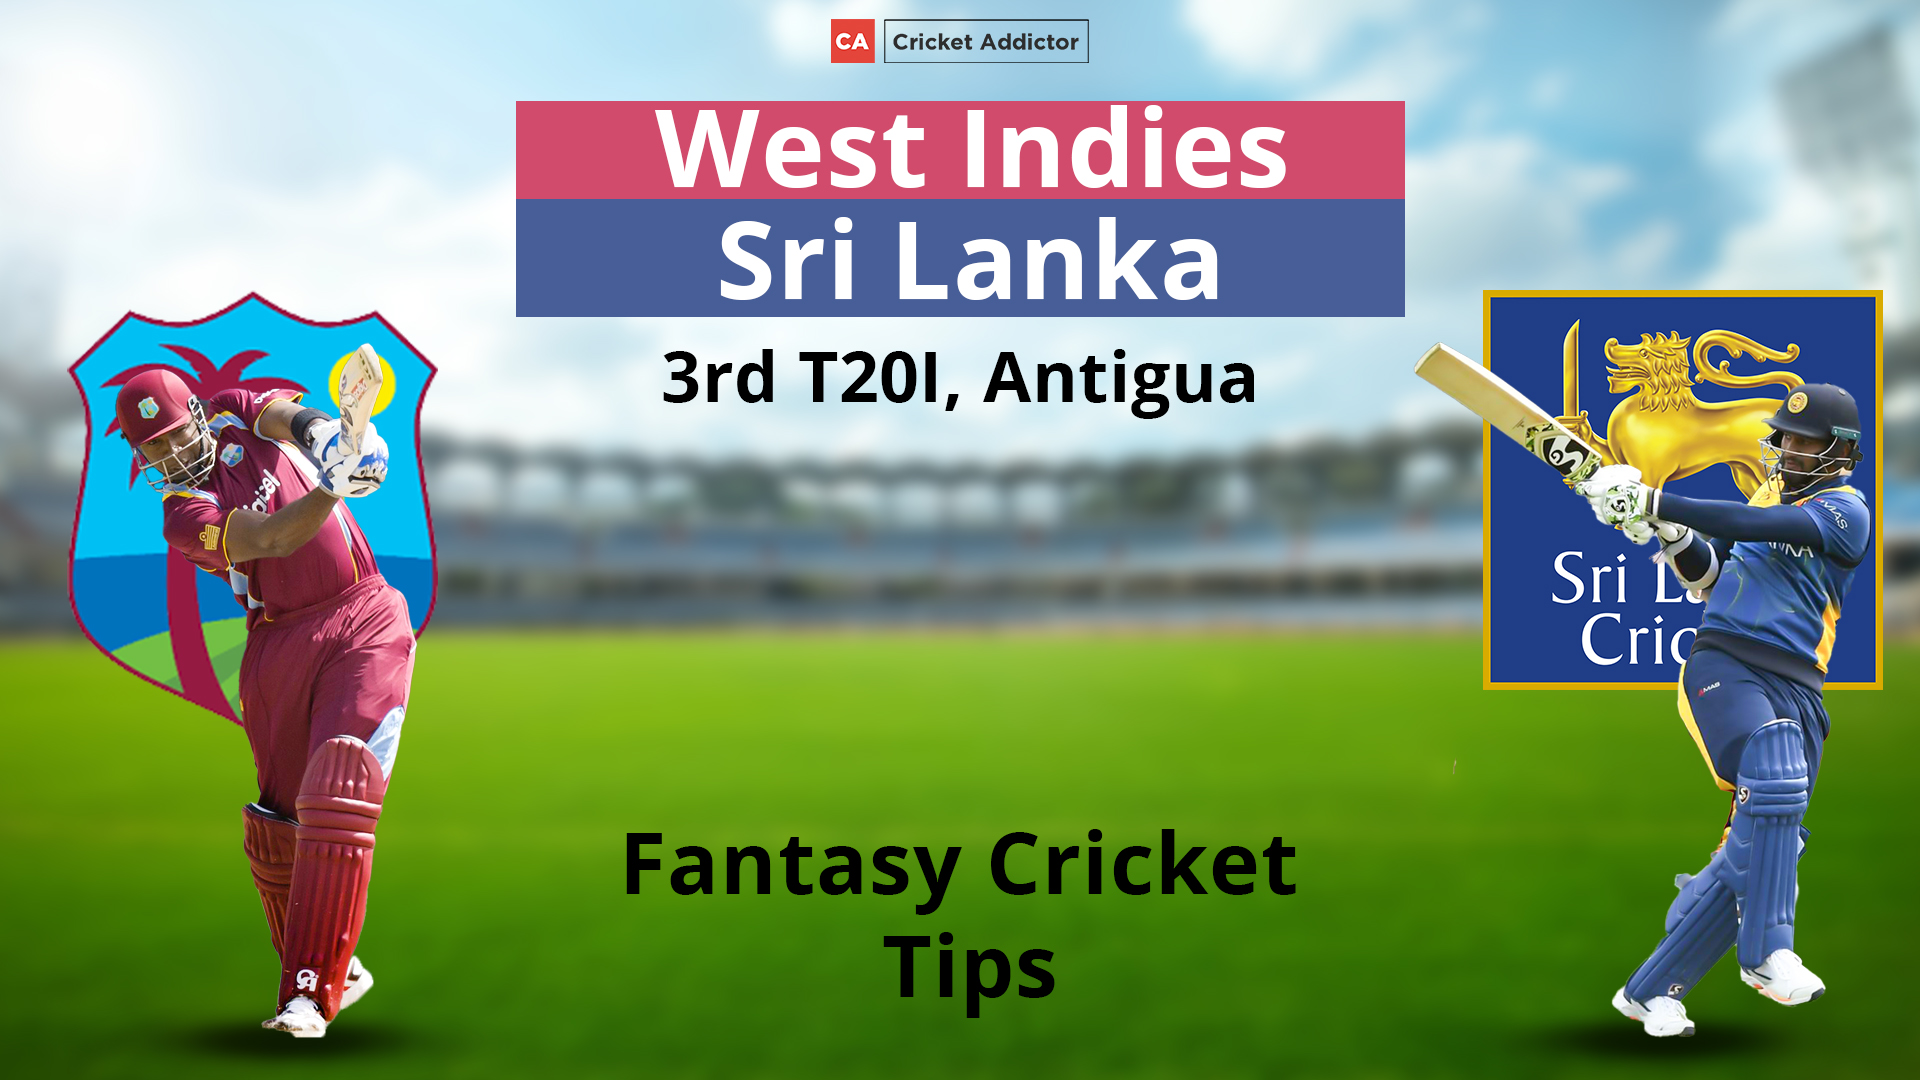 West Indies vs Sri Lanka Dream11 Prediction, Fantasy Cricket Tips, Playing XI, Pitch Report, Dream11 Team, and Injury Update.